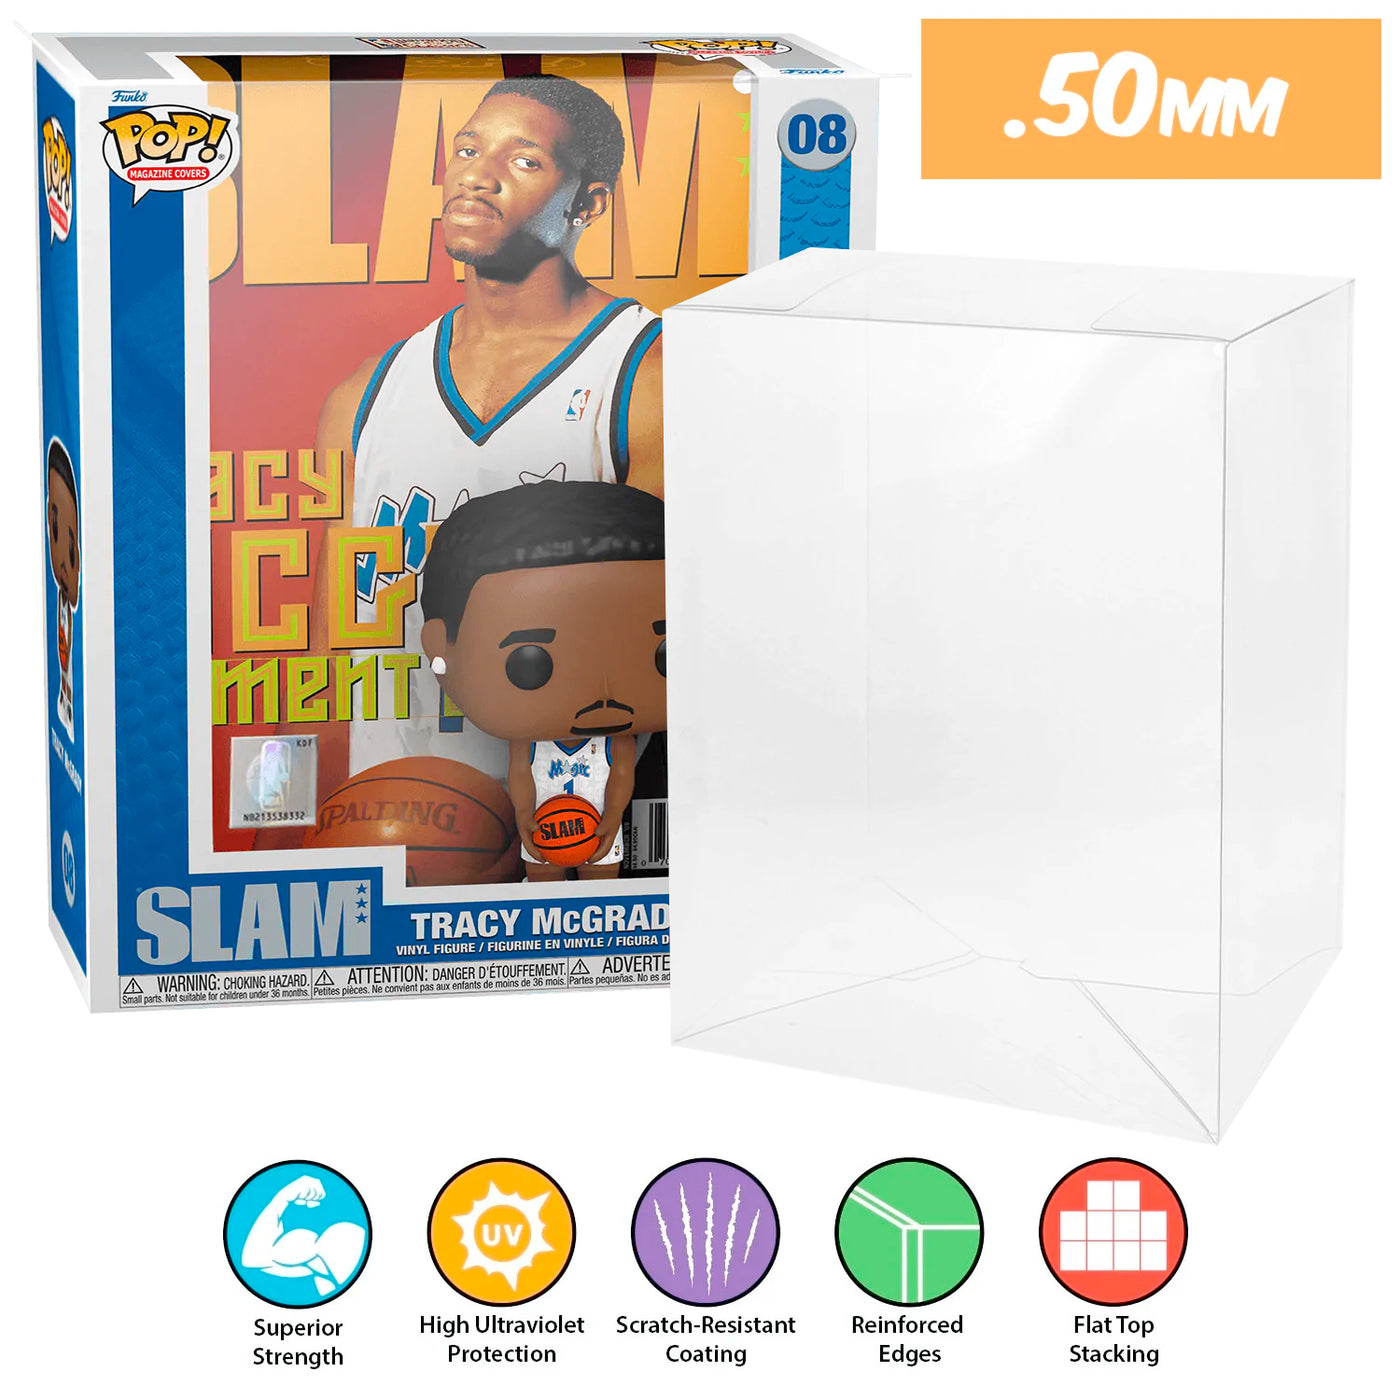 08 tracy mcgrady pop magazines covers slam nba best funko pop protectors thick strong uv scratch flat top stack vinyl display geek plastic shield vaulted eco armor fits collect protect display case kollector protector